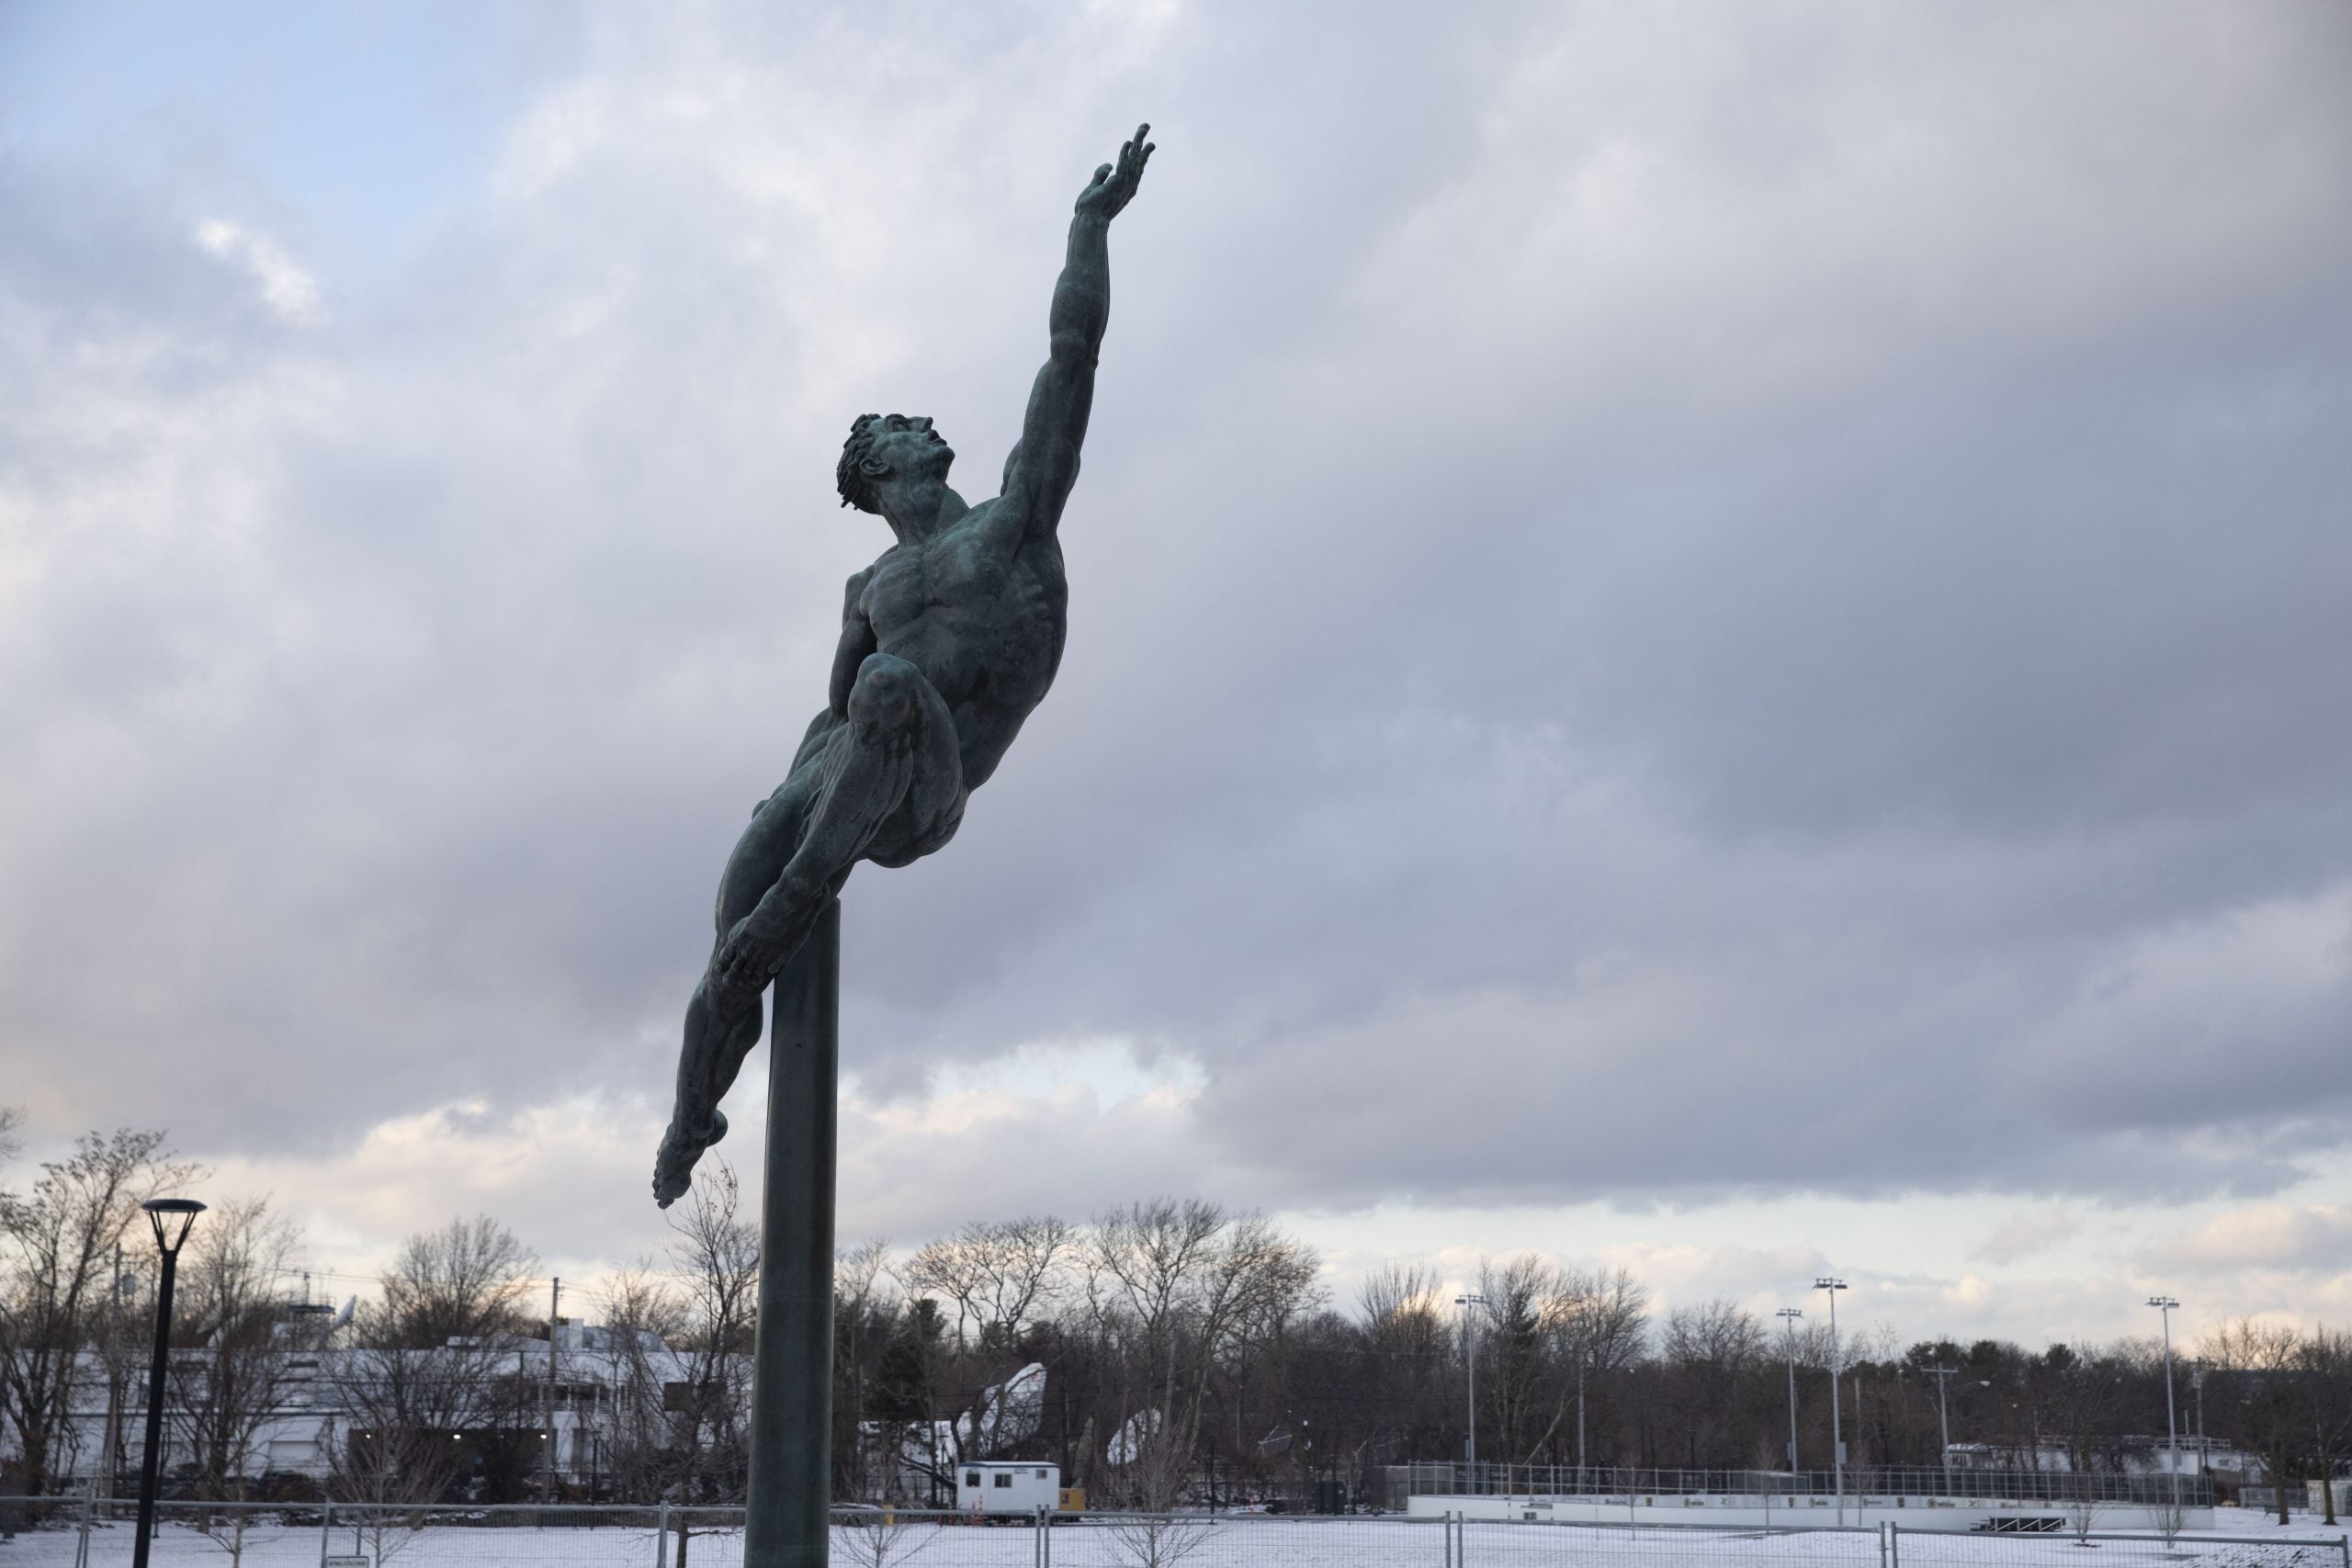 A statue of someone leaping and reaching to the heavens.